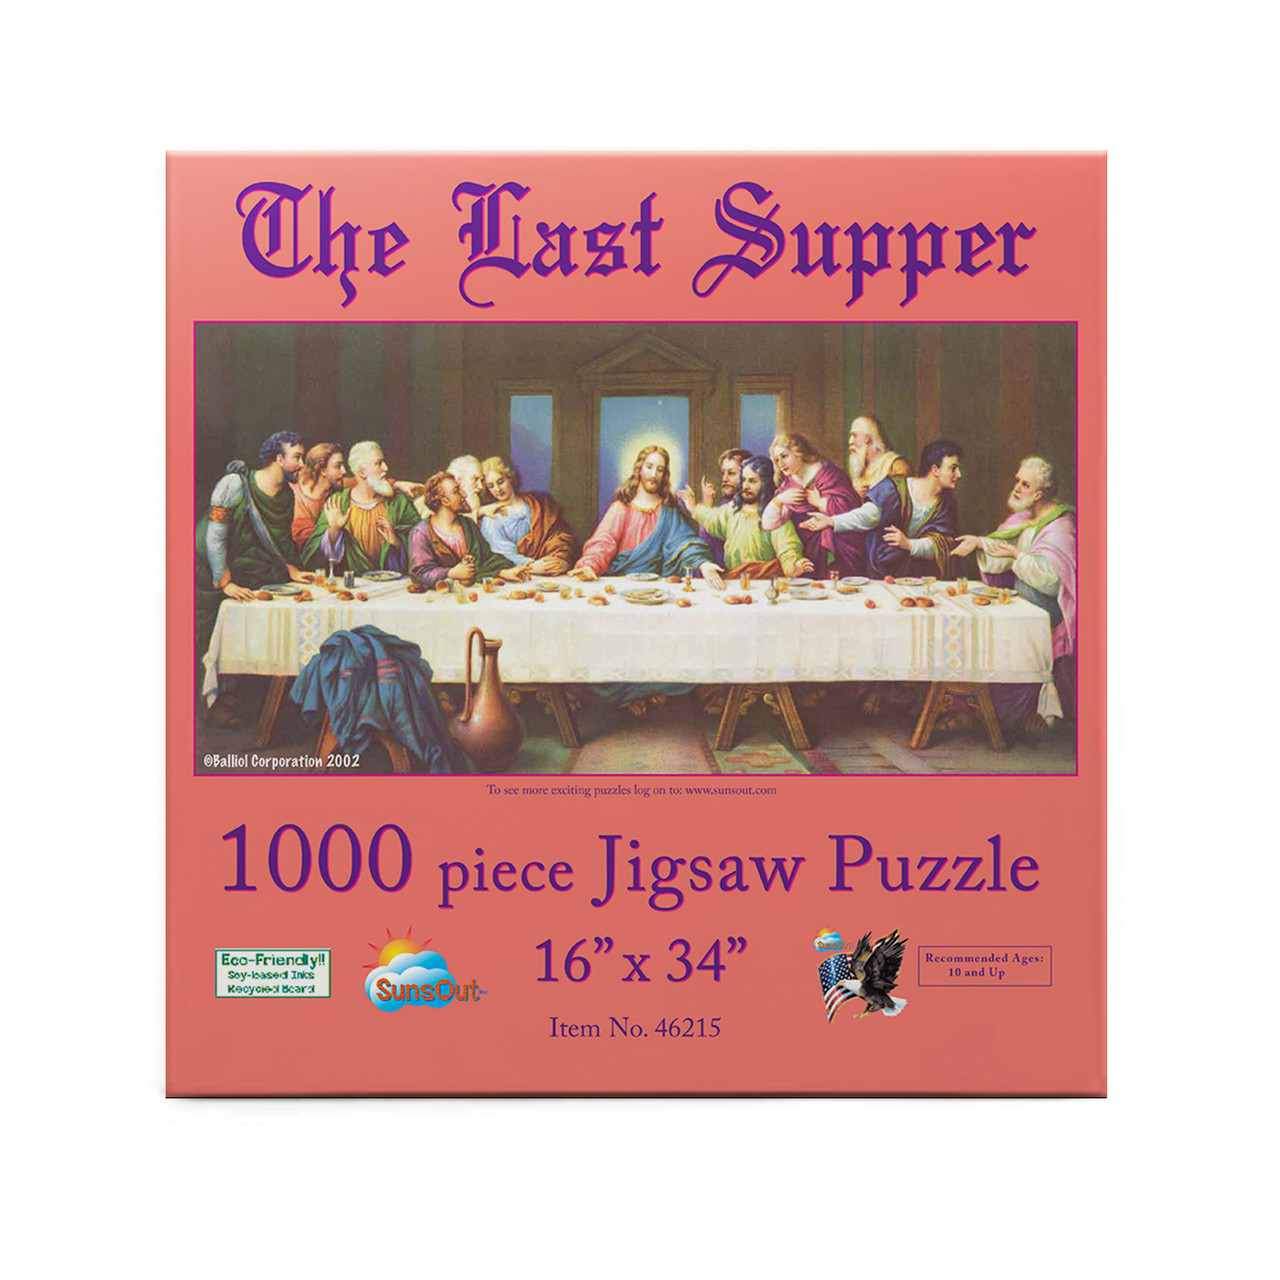 SUNSOUT INC - The Last Supper - 1000 pc Jigsaw Puzzle by Artist